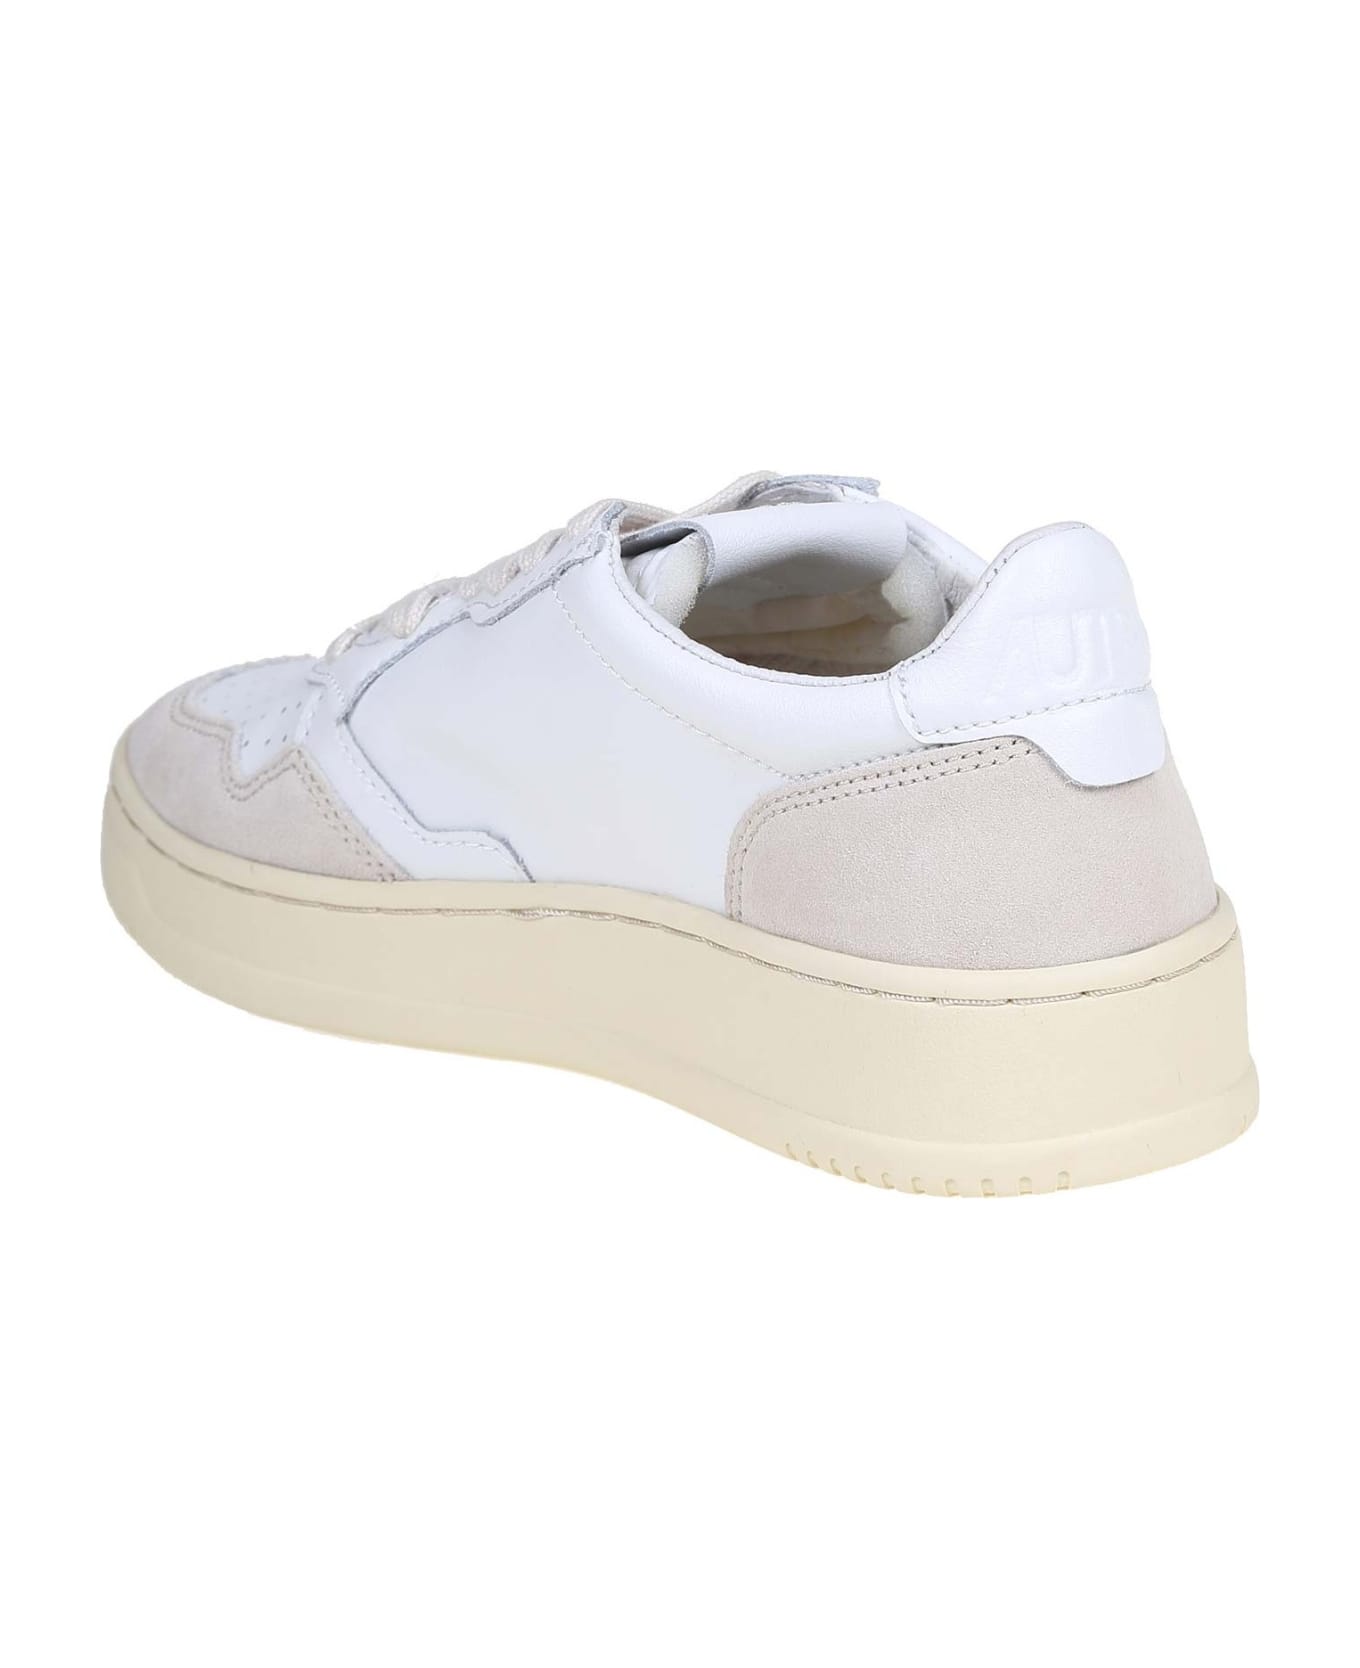 Autry White Leather Sneakers - White スニーカー